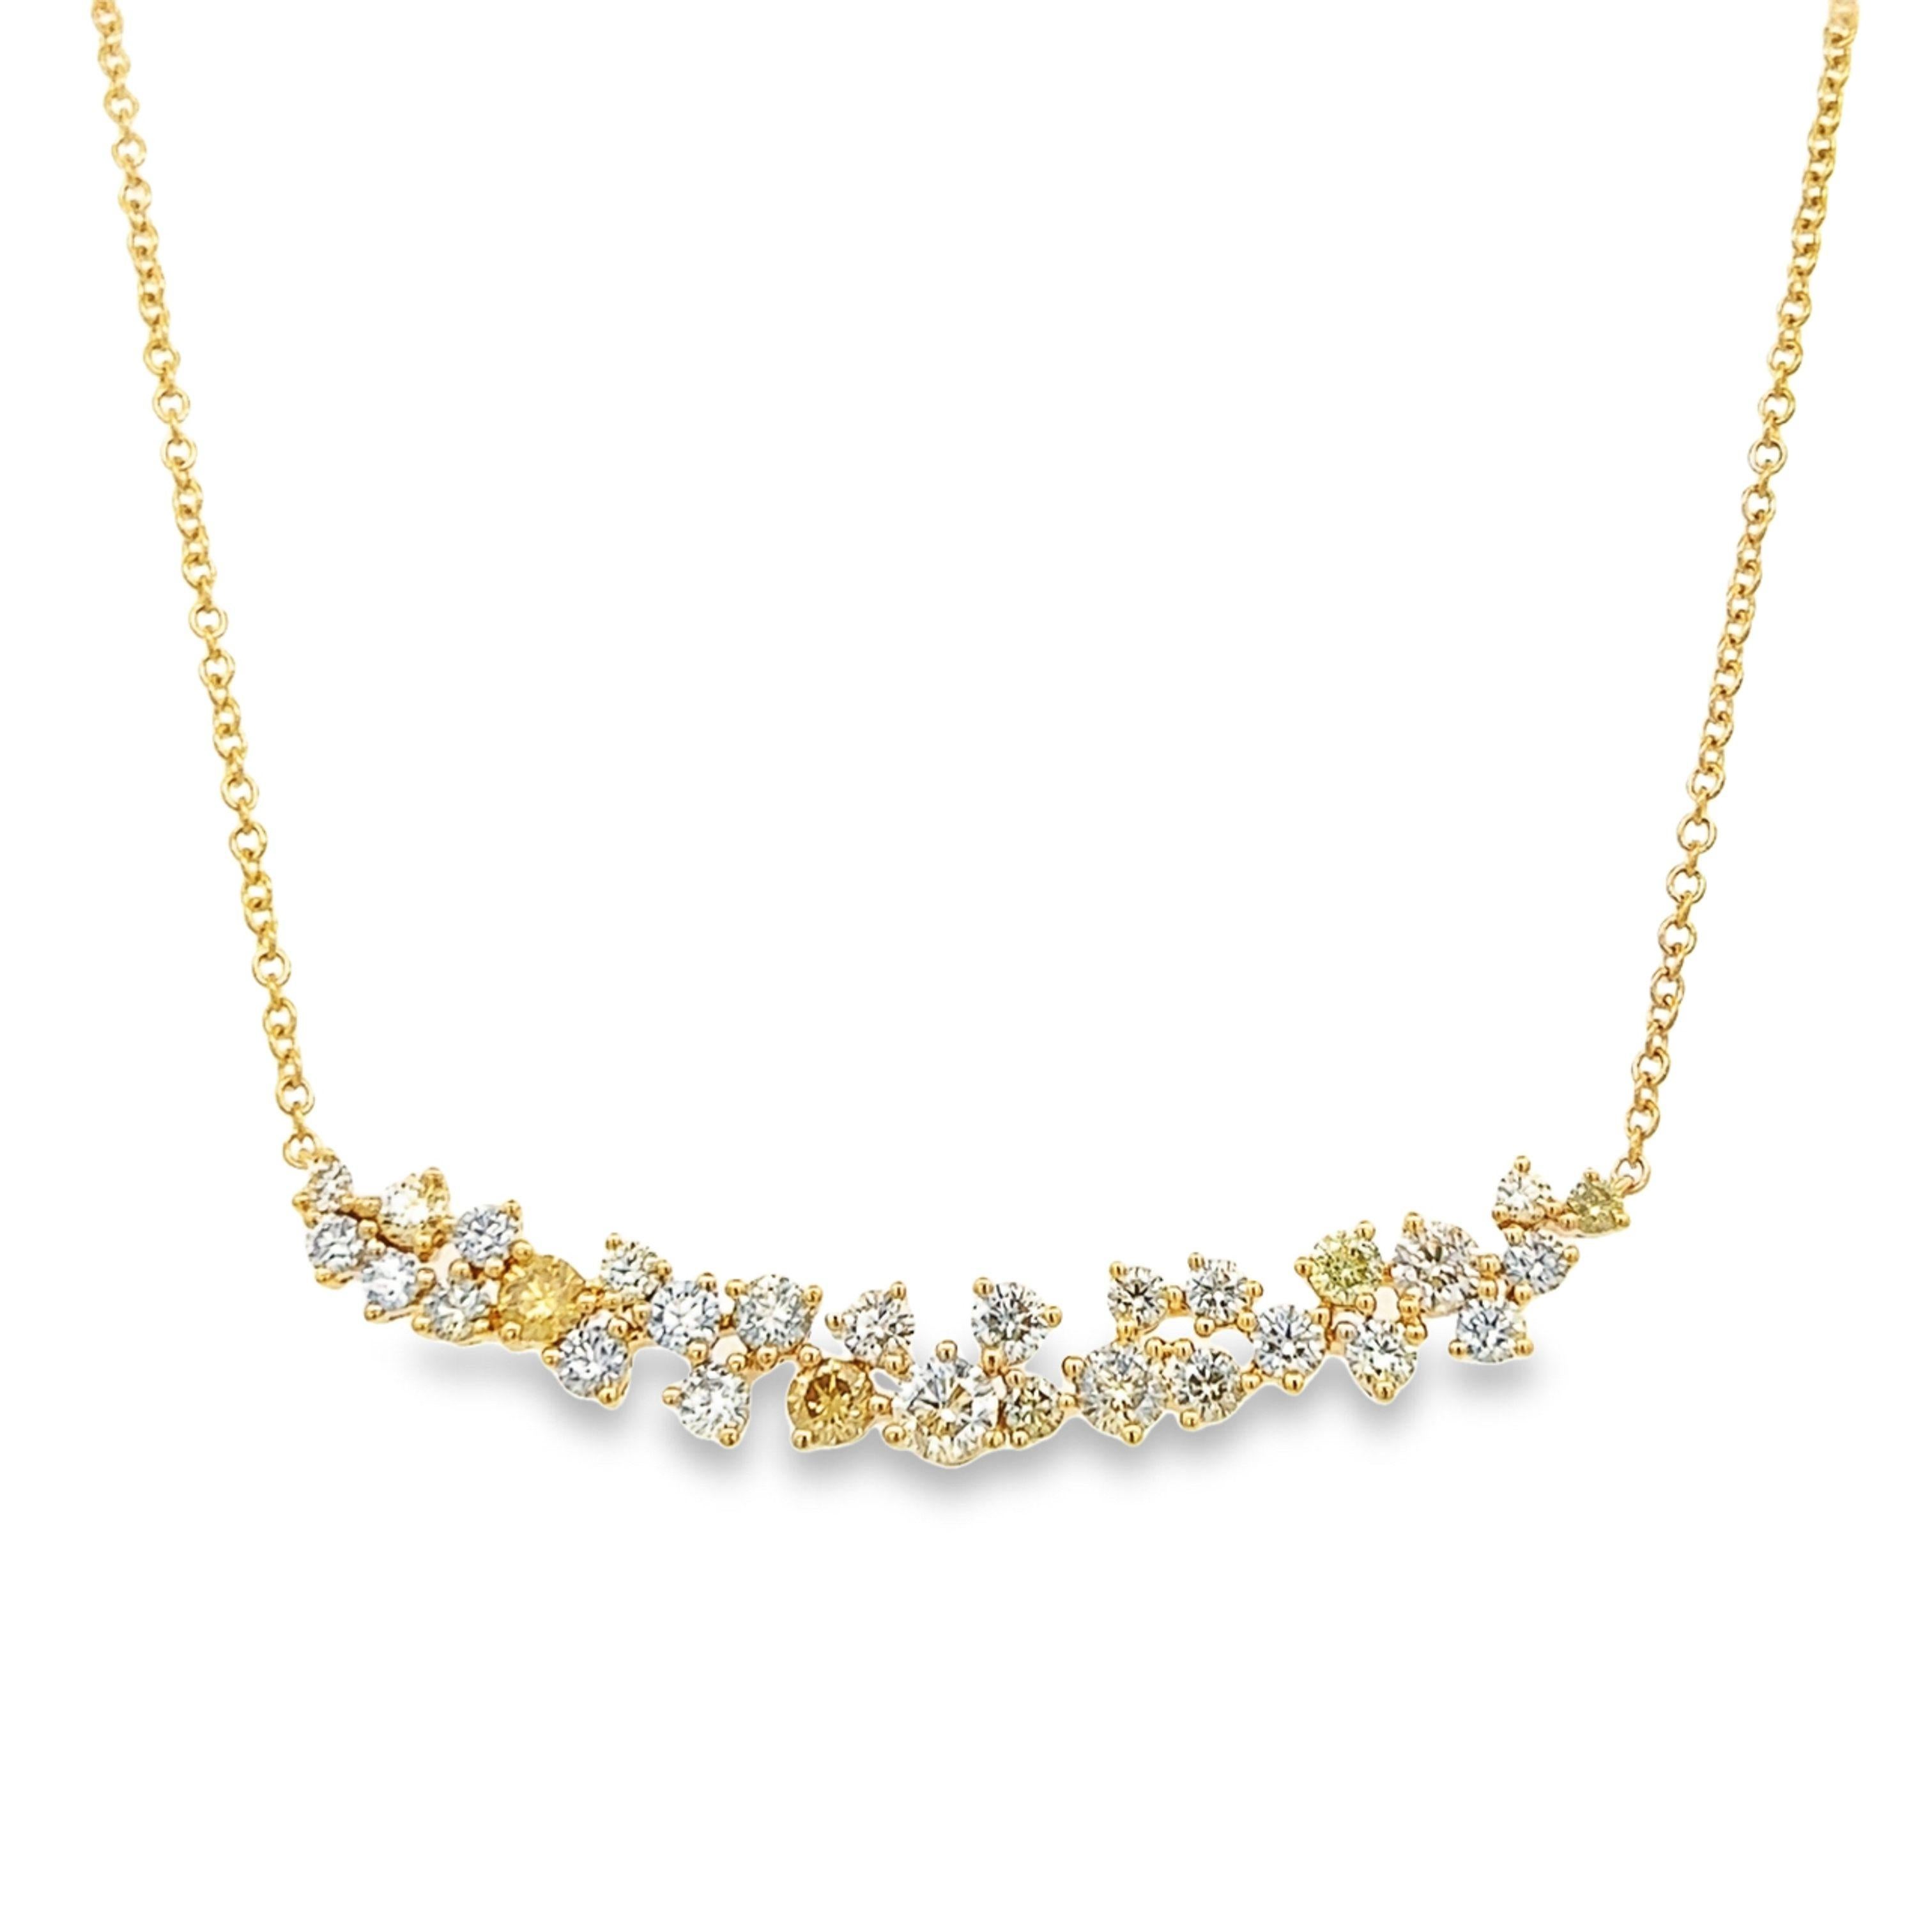 Exquisite multi shade color diamond necklace pendant, by Alexander Beverly Hills.
29 round brilliant diamonds, 3.68 carats. Mixed color diamonds, approximately Light Yellow, I/J and SI clarity. Prong set in 18k yellow gold, 9.45 grams.
Accommodated